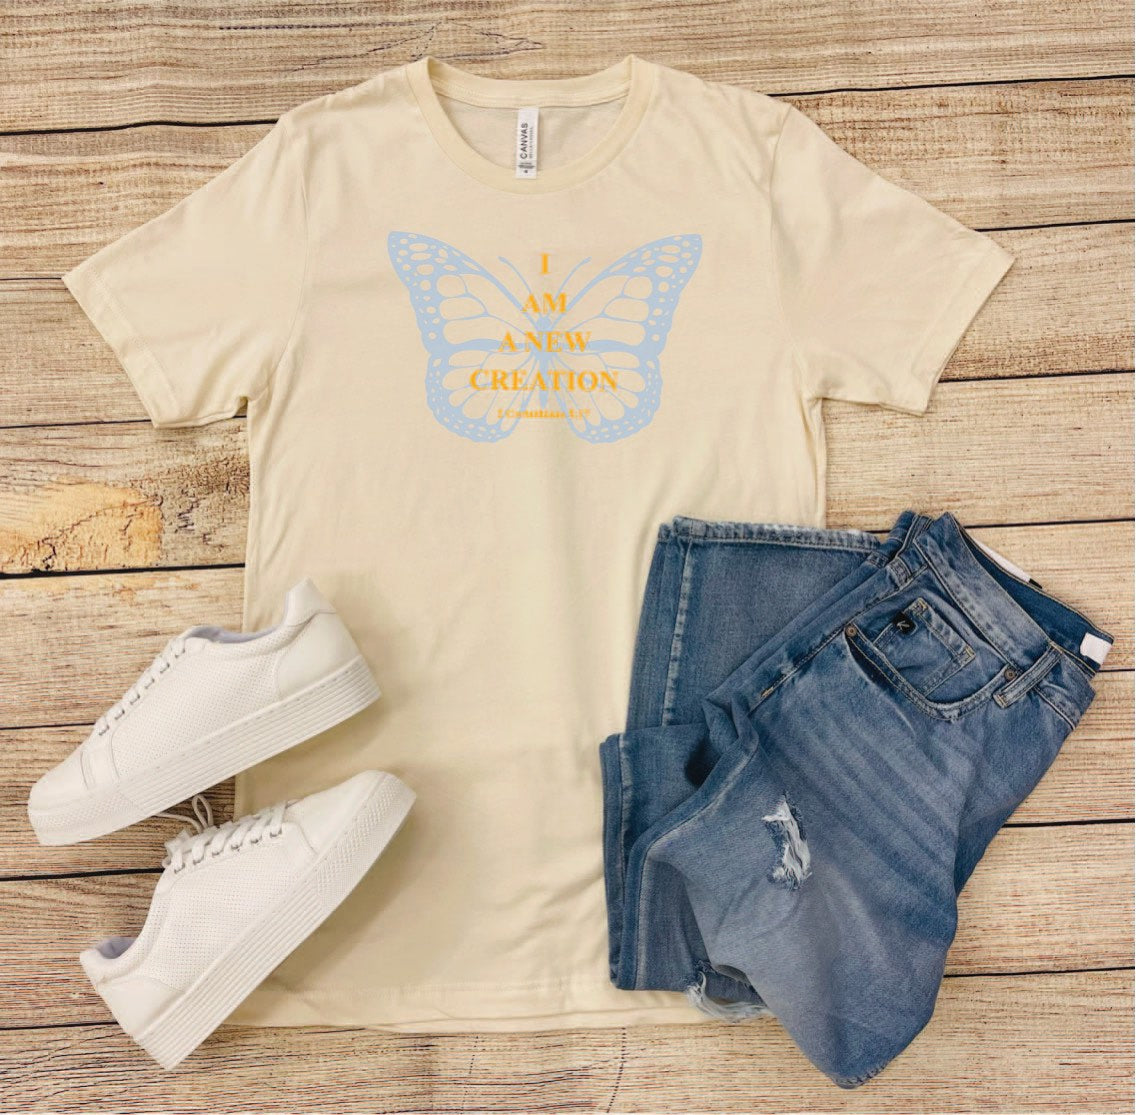 This is a creamy tan tee with a light blue and gold graphic. The graphic features a blue butterfly with the words, "I AM A NEW CREATION," along with the Bible verse underneath. It is a regular unisex style with a crew neckline.